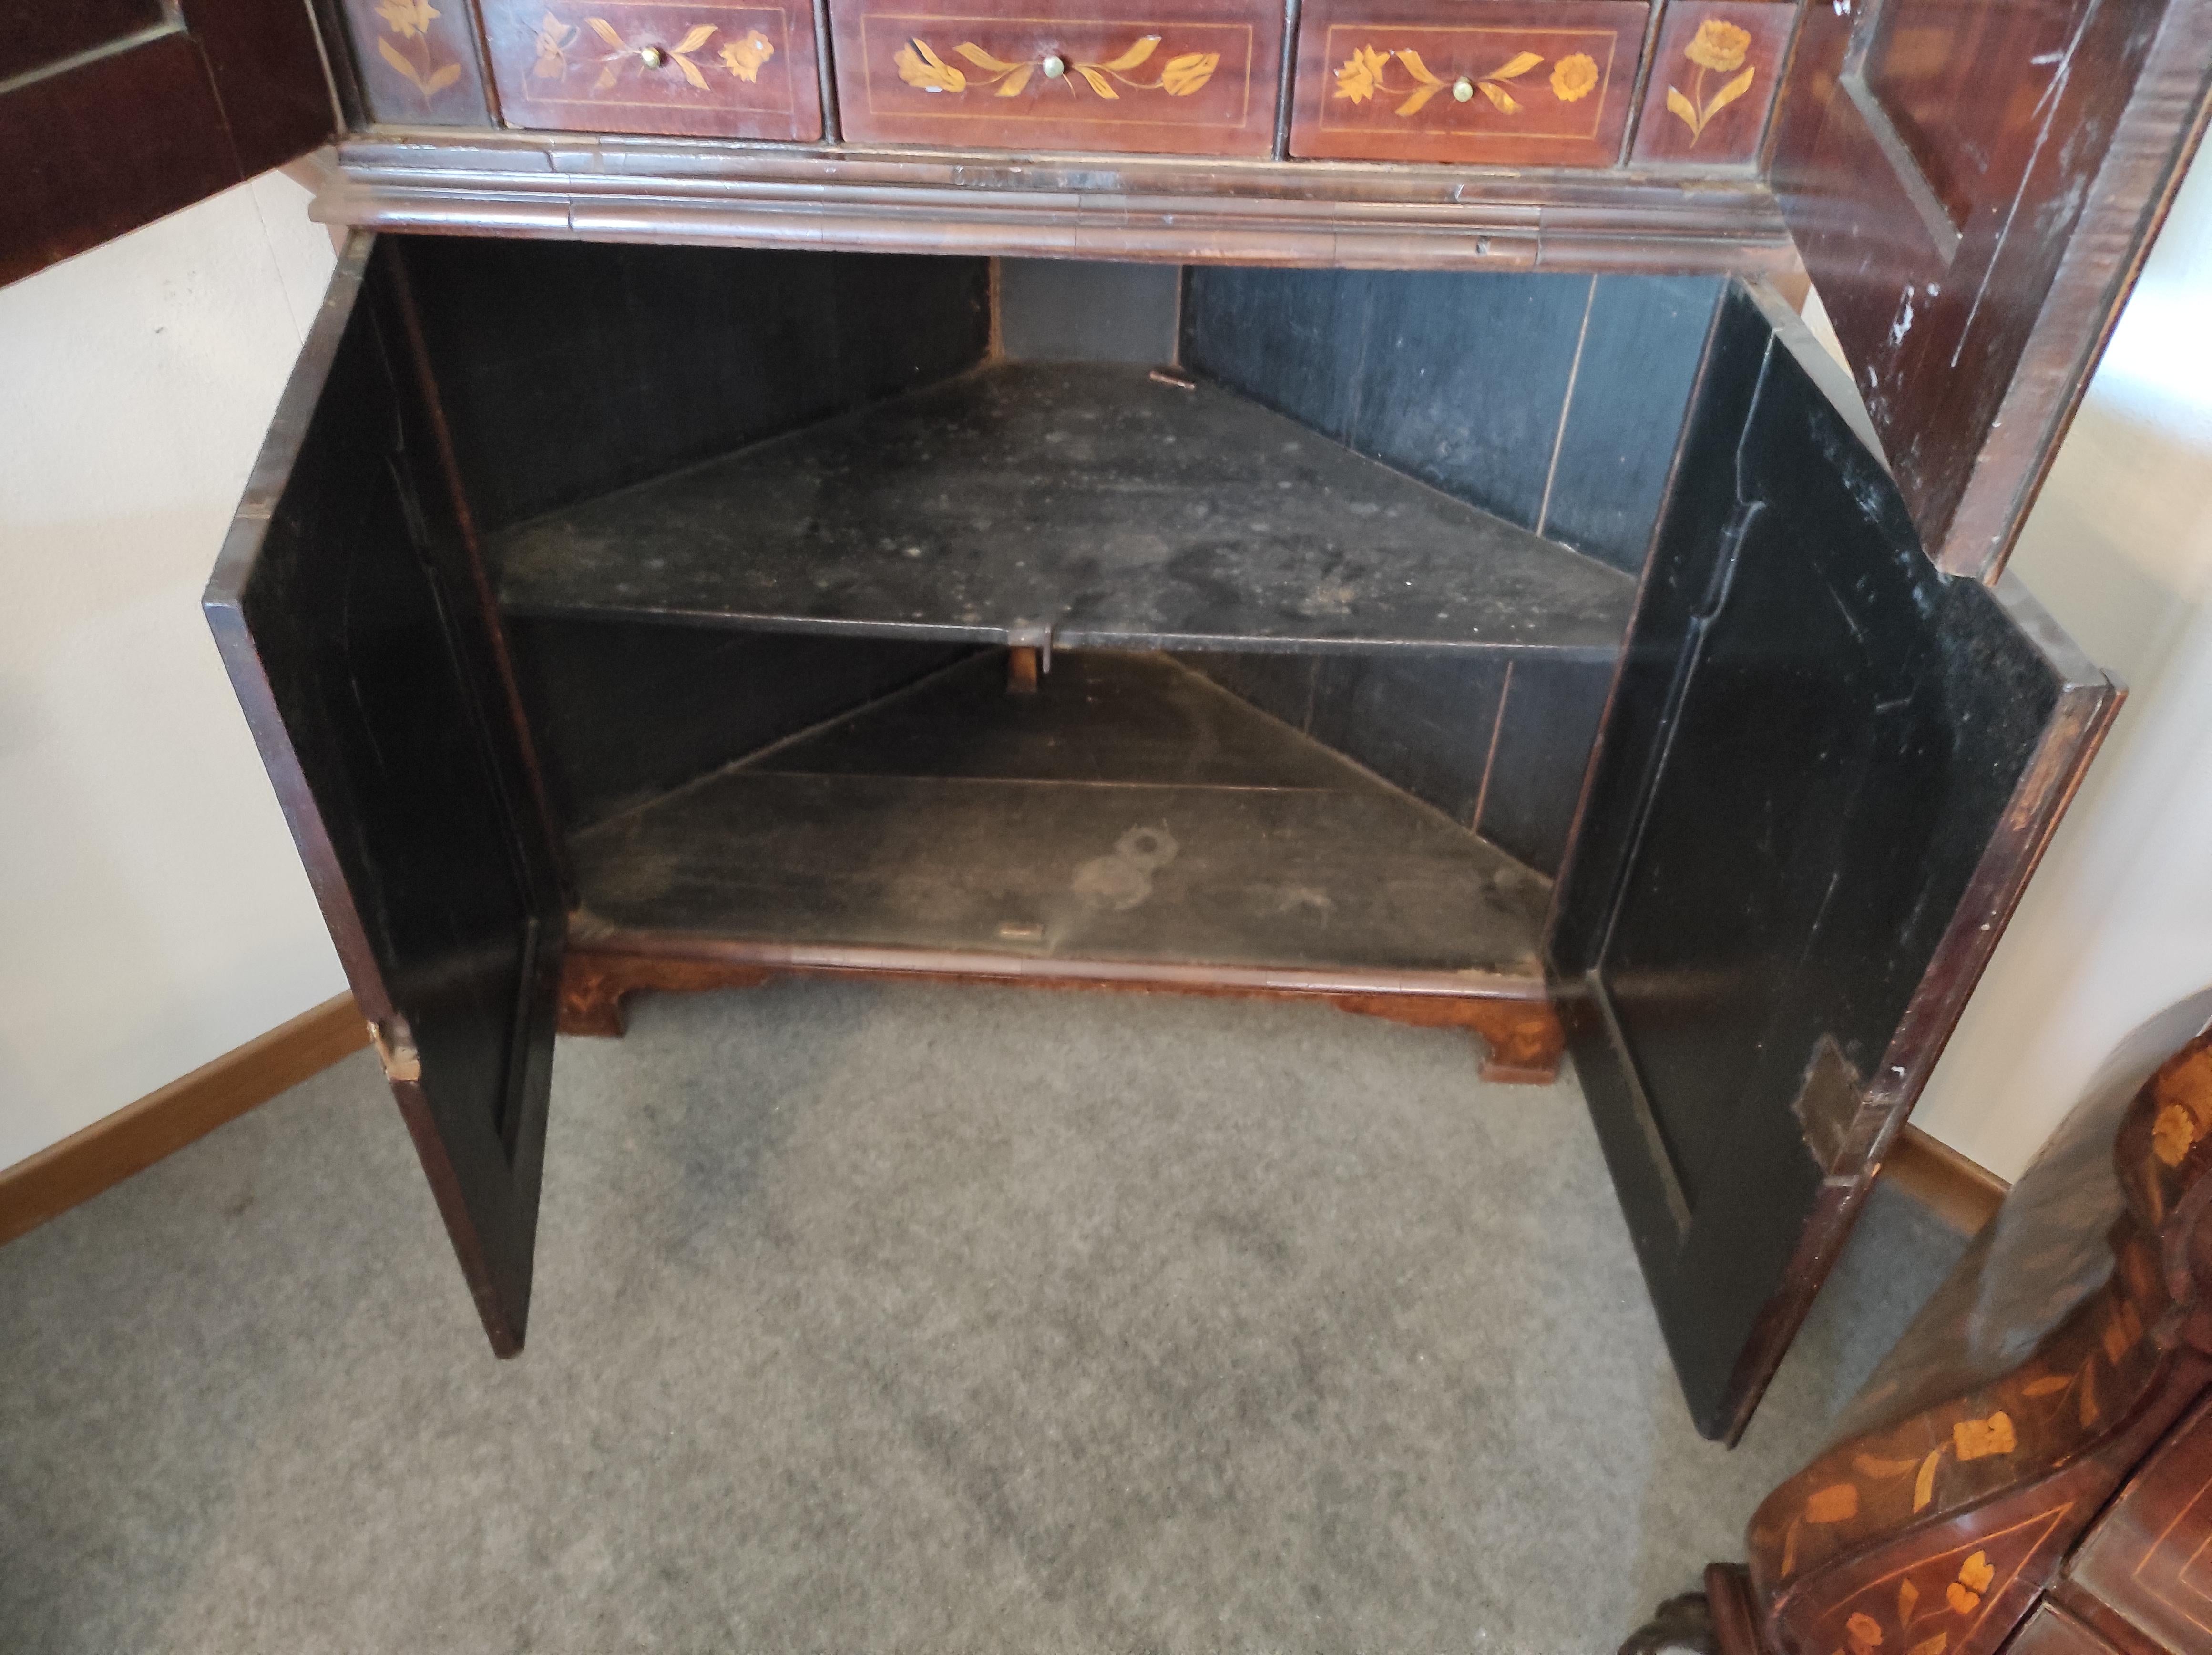 Dutch mahogany corner piece late 1700s period
Fully inlaid with internal drawers.
It is still deliberately to be restored because it is important for the buyer to see its original patina and how beautiful it has been kept over time.By restoration I